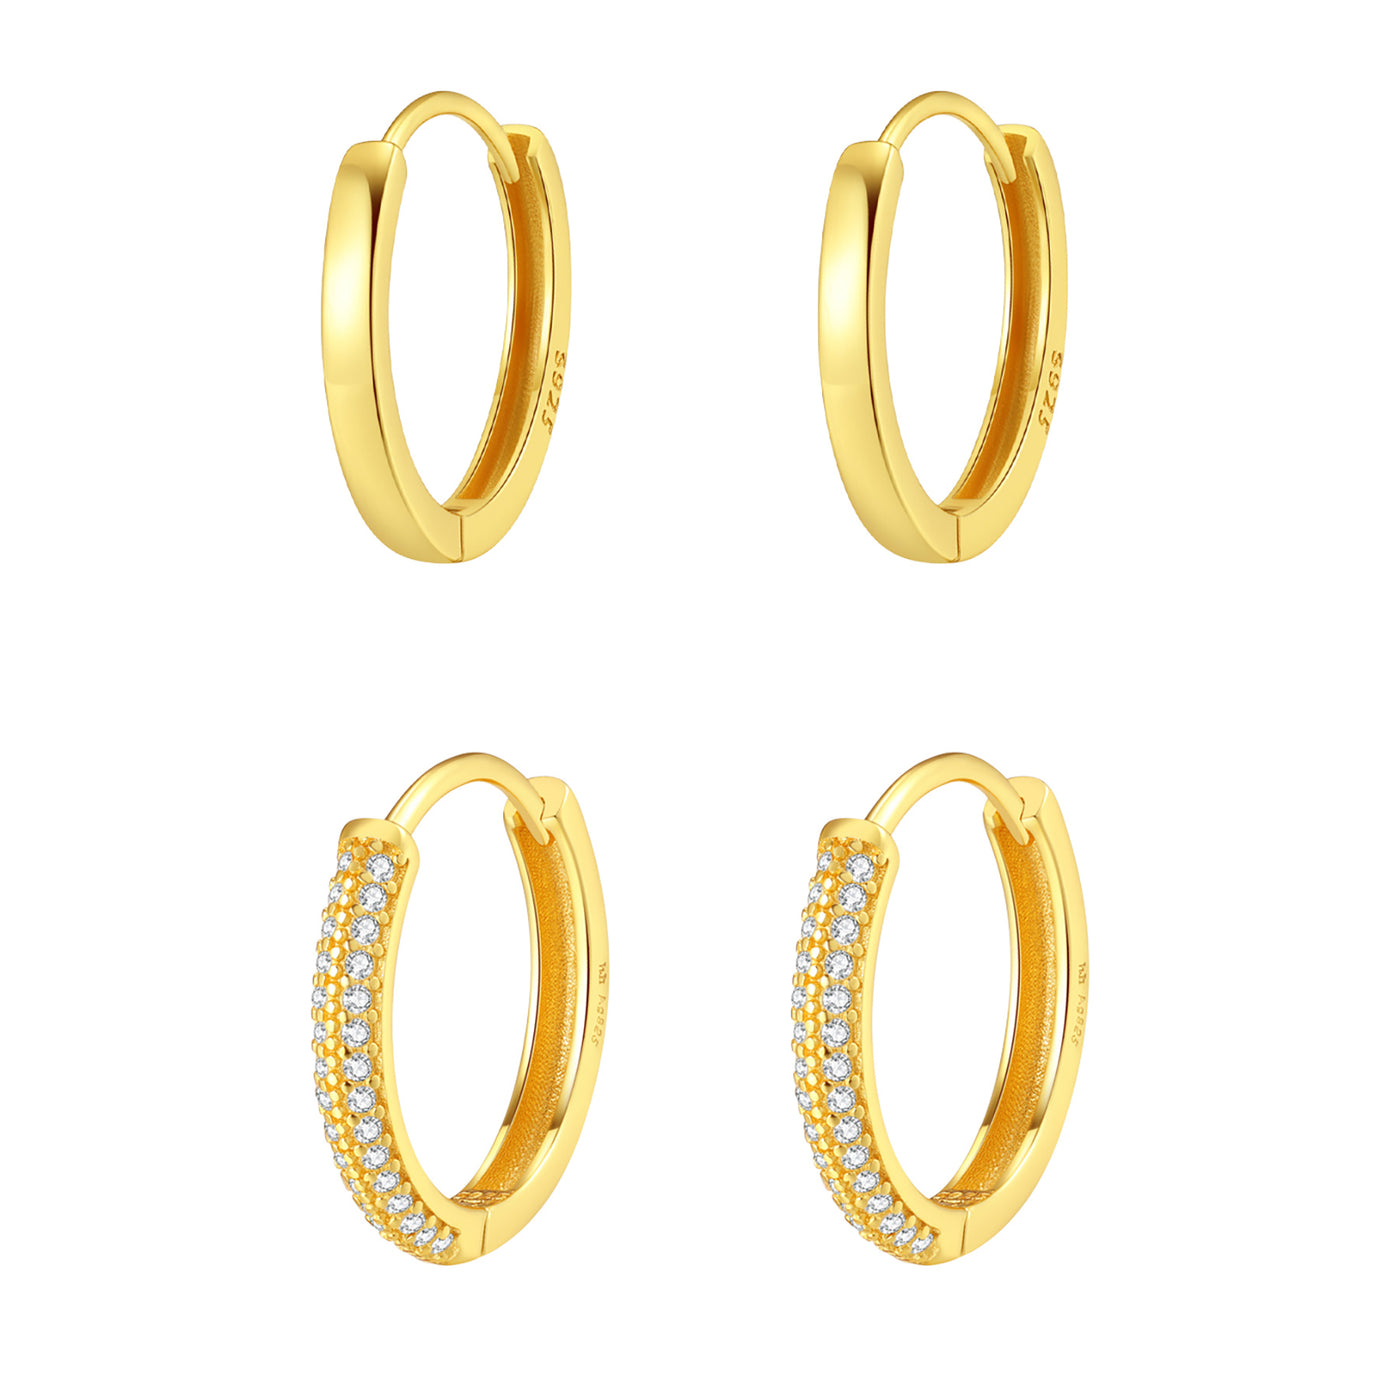 Double Gemstone and Classic Band Hoop Earring Sets